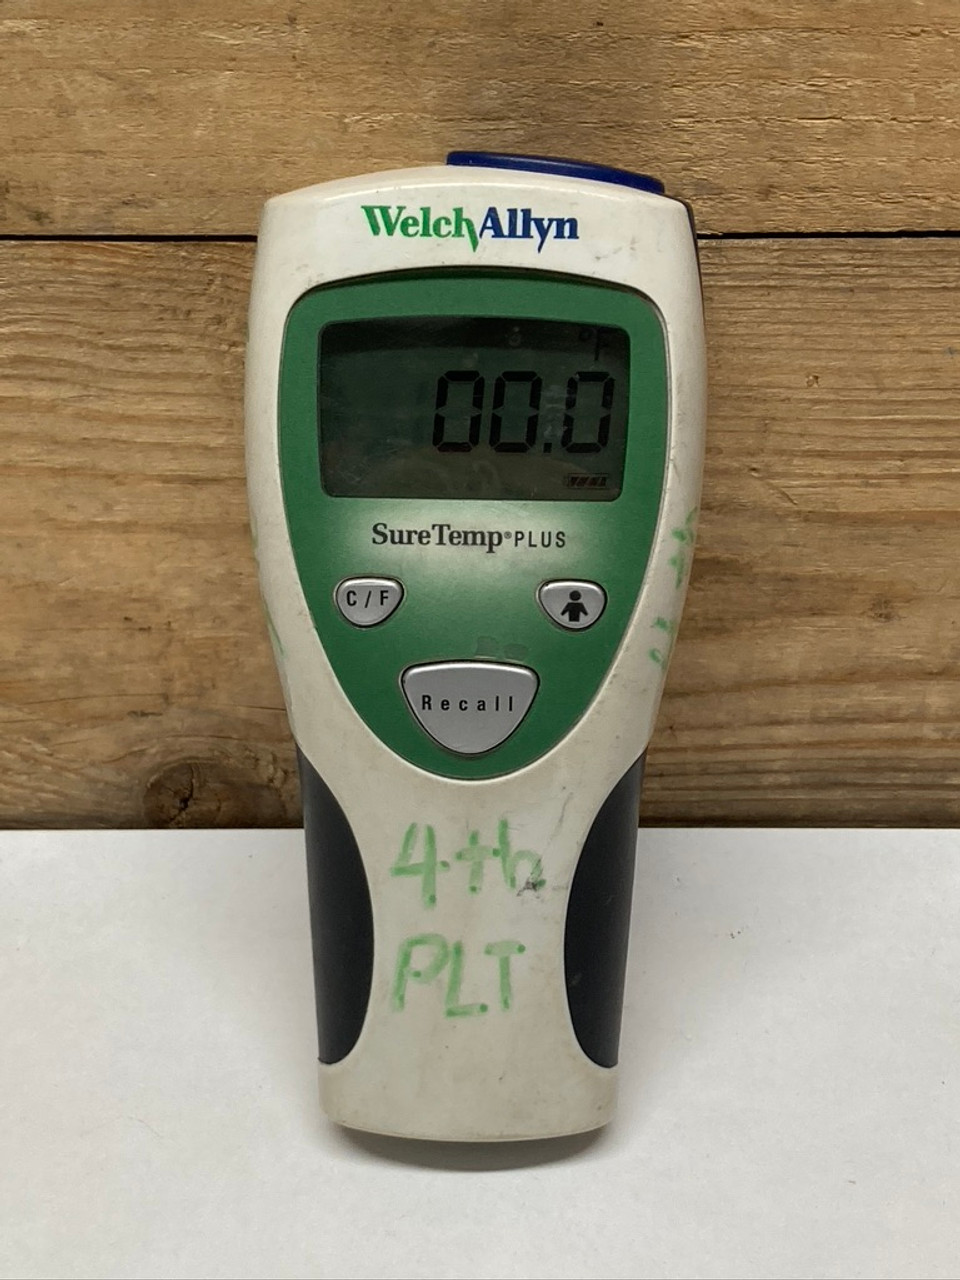 Welch Allyn SureTemp Plus 690 Electronic Thermometer SN 11172078